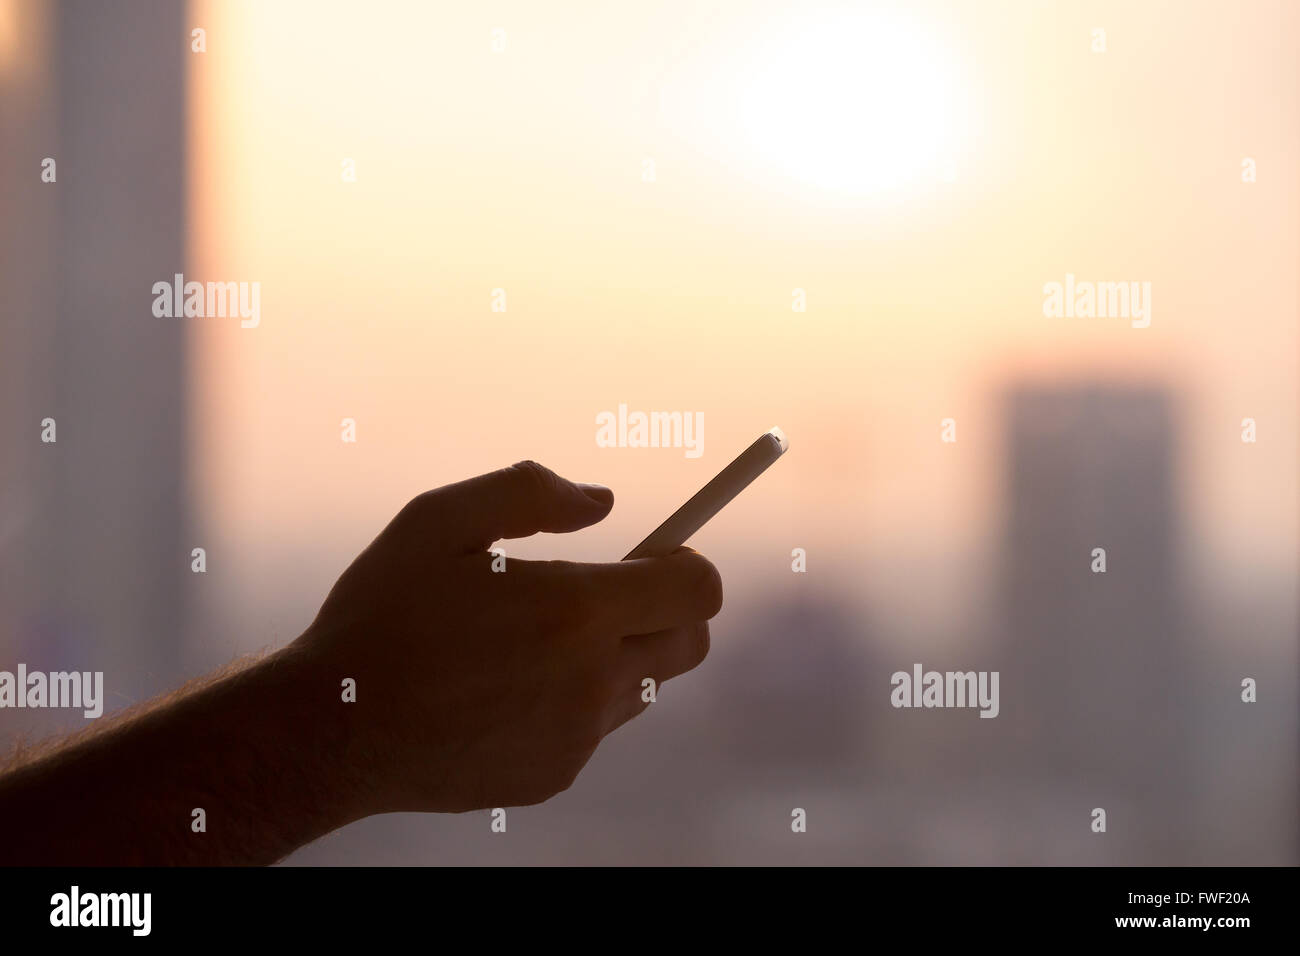 Close-up of hands of young man holding mobile phone, using smartphone app, scrolling. silhouette against sunny street view Stock Photo